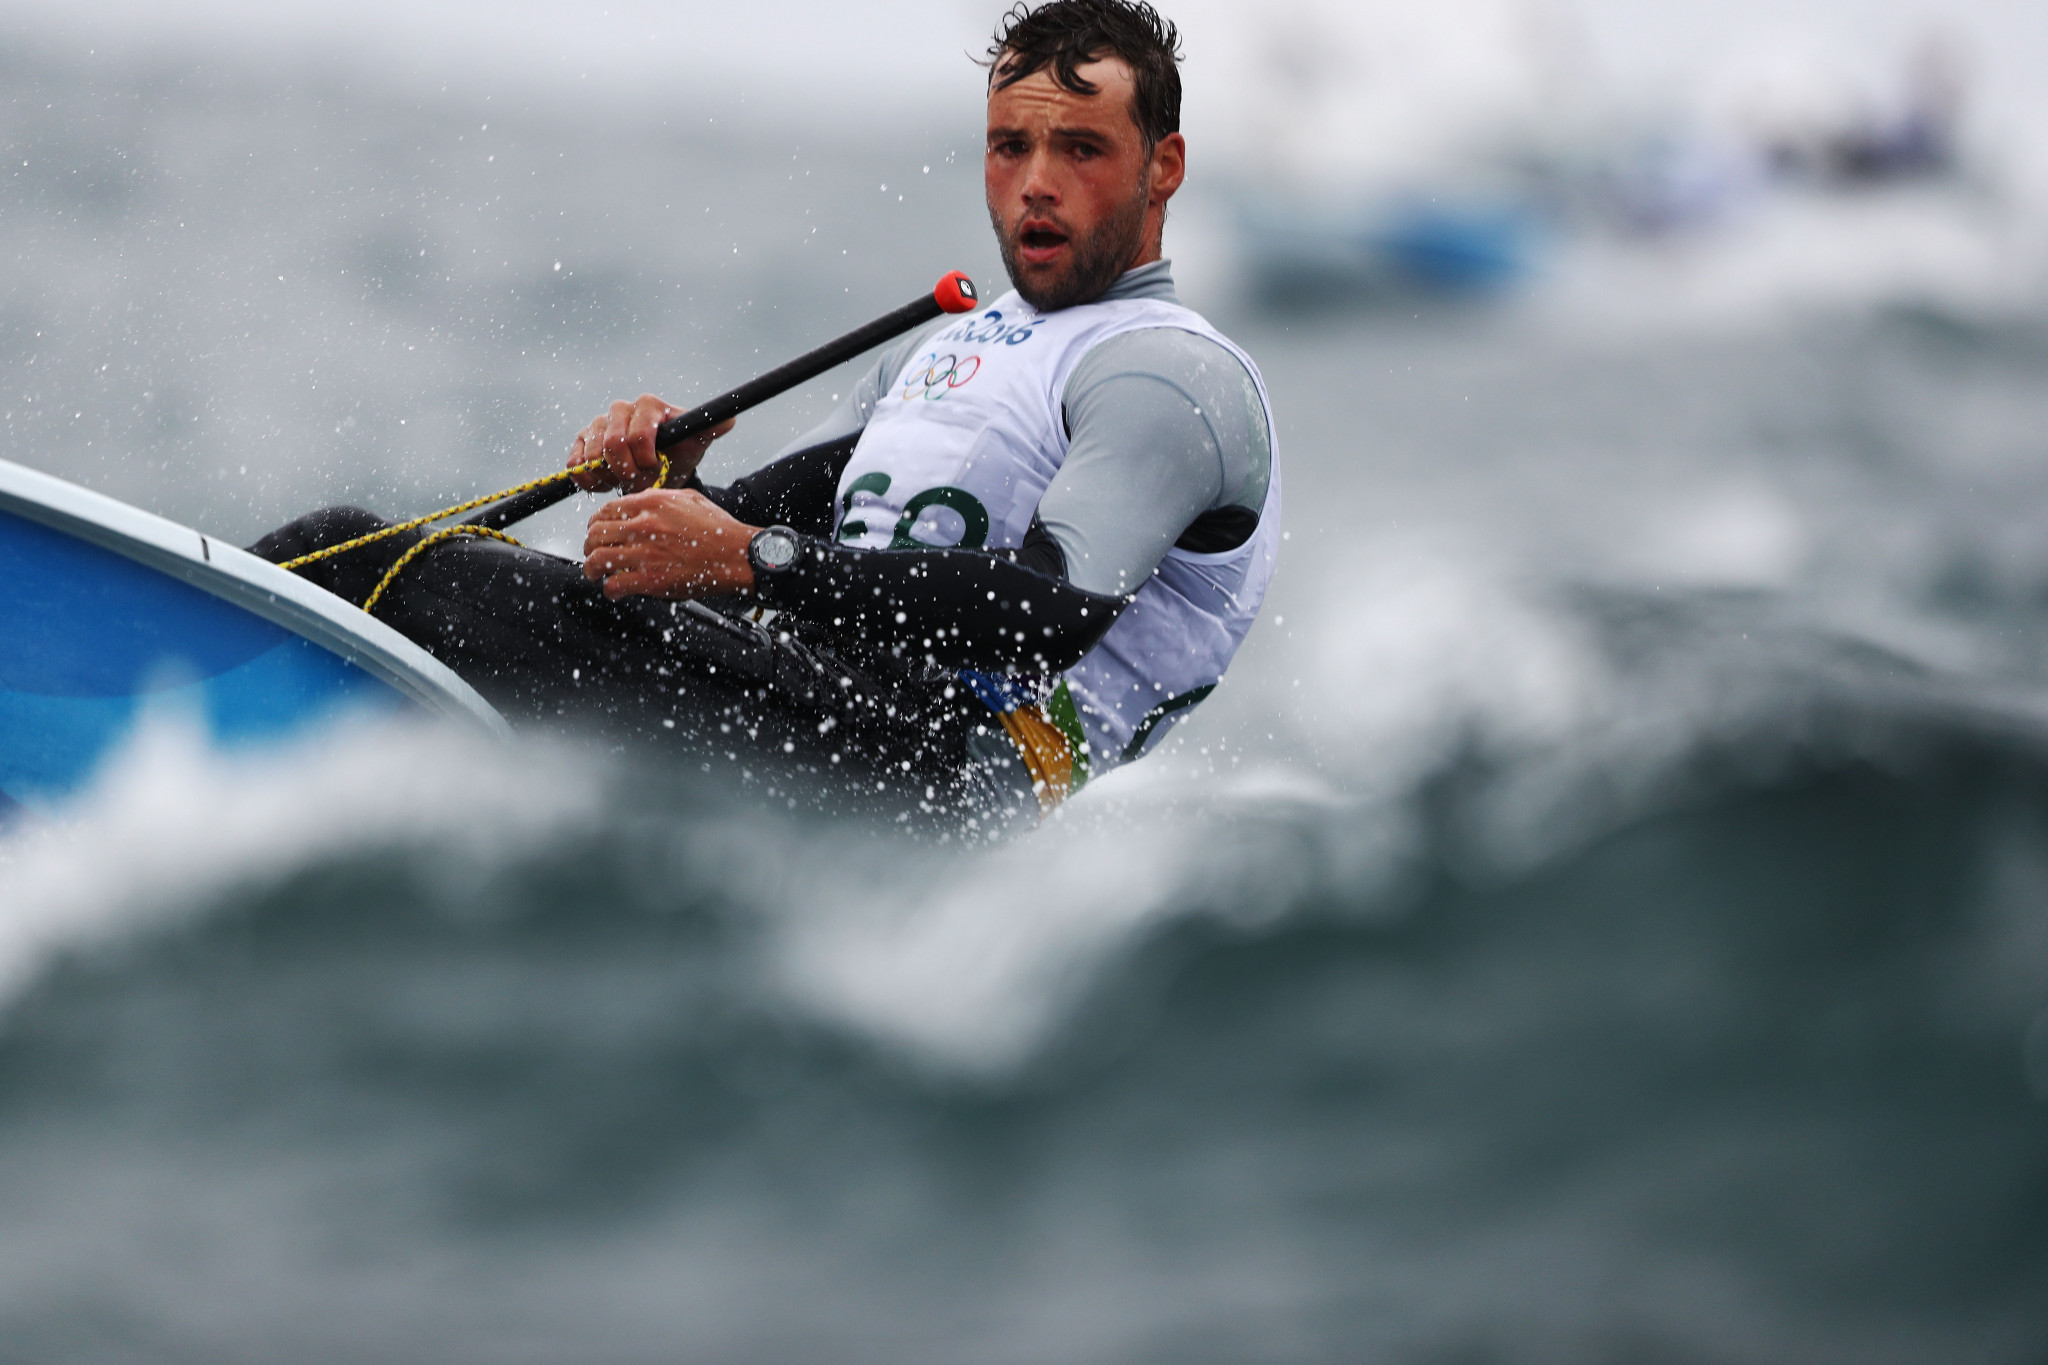 Buhl takes top spot on his own at Laser Standard World Championships